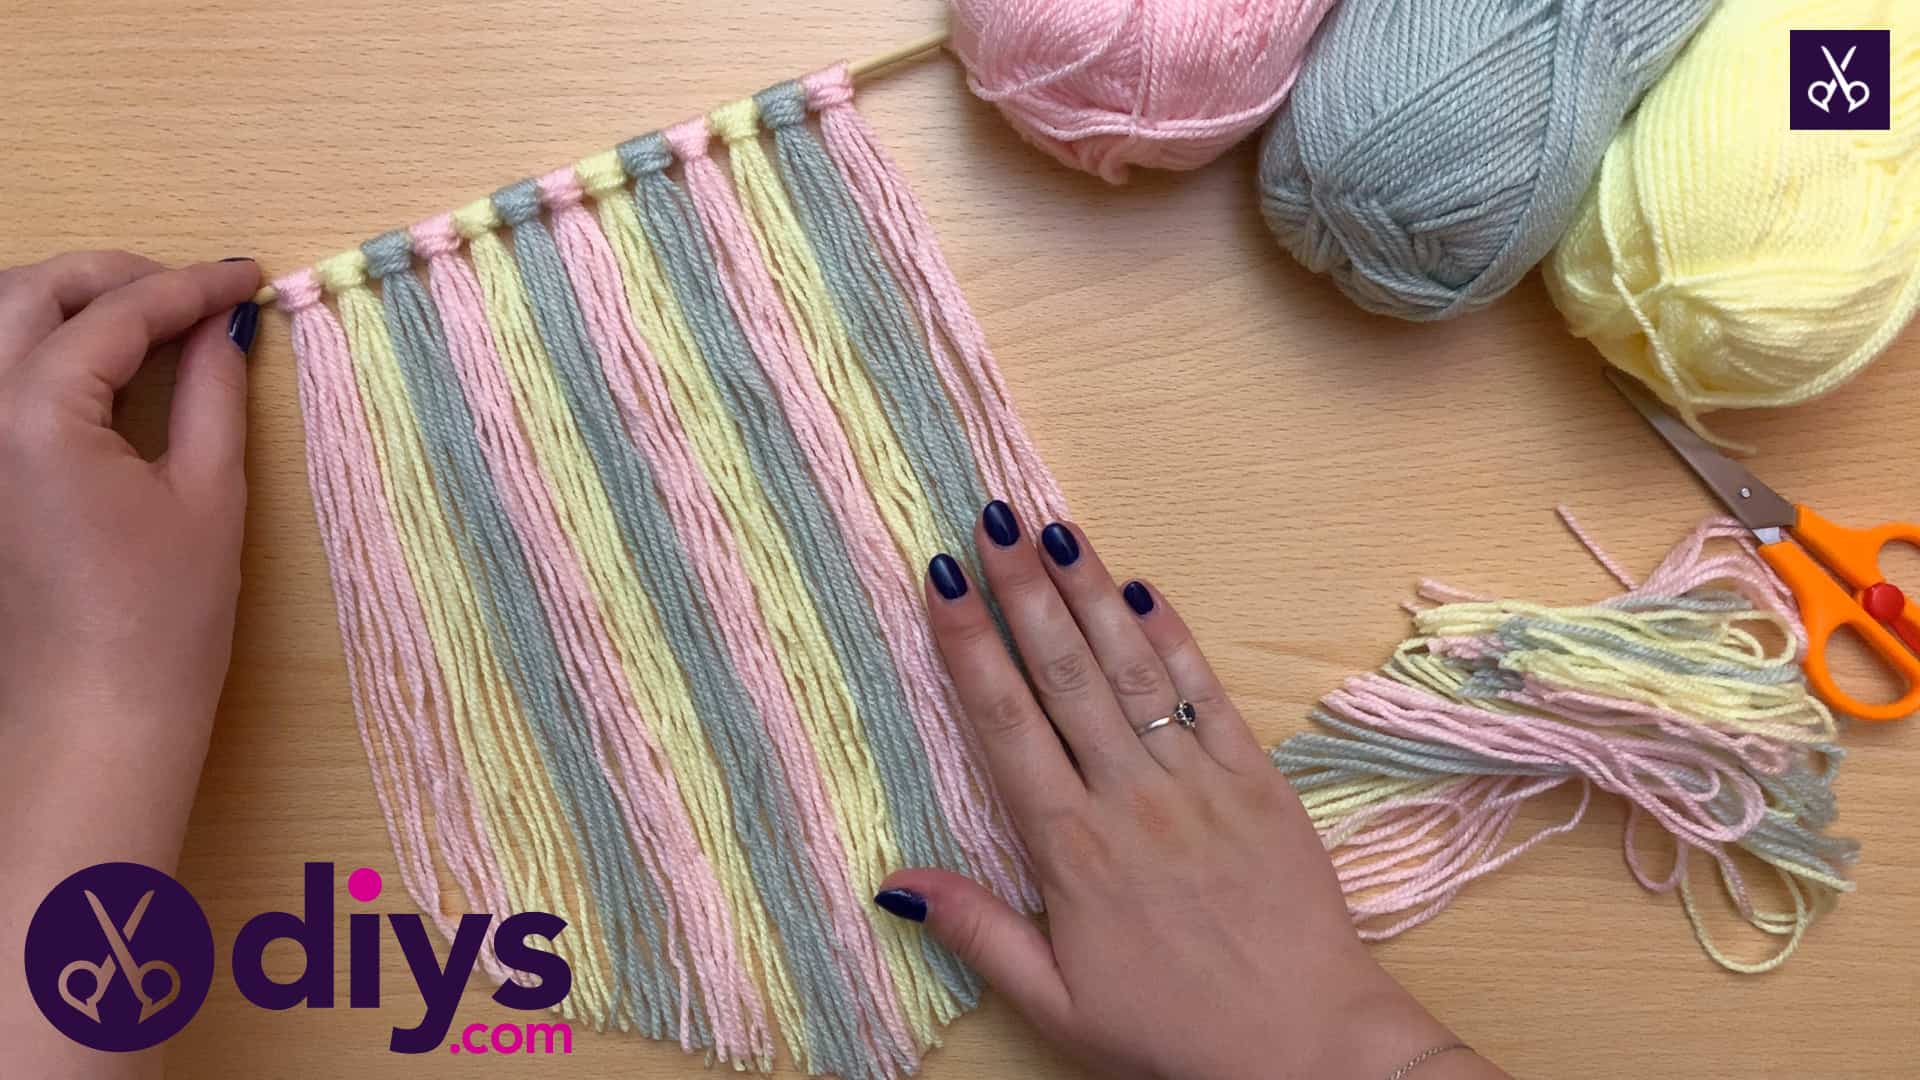 How to make a yarn wall hanging create a colorful look